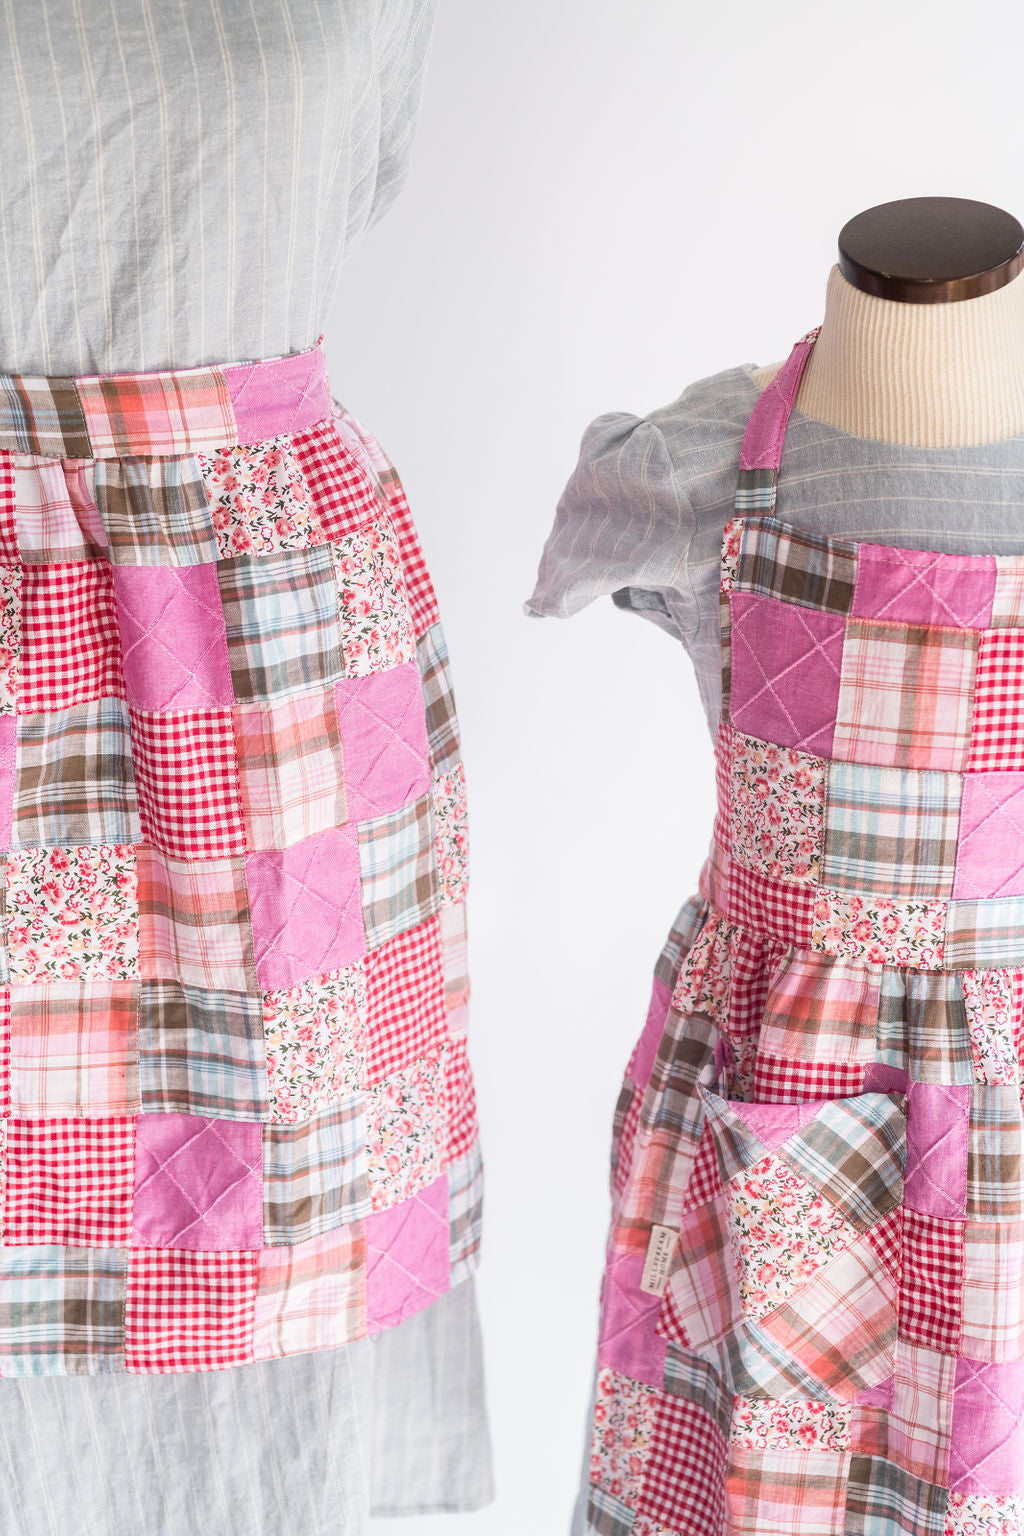 The Child's Quilted Patchwork Apron